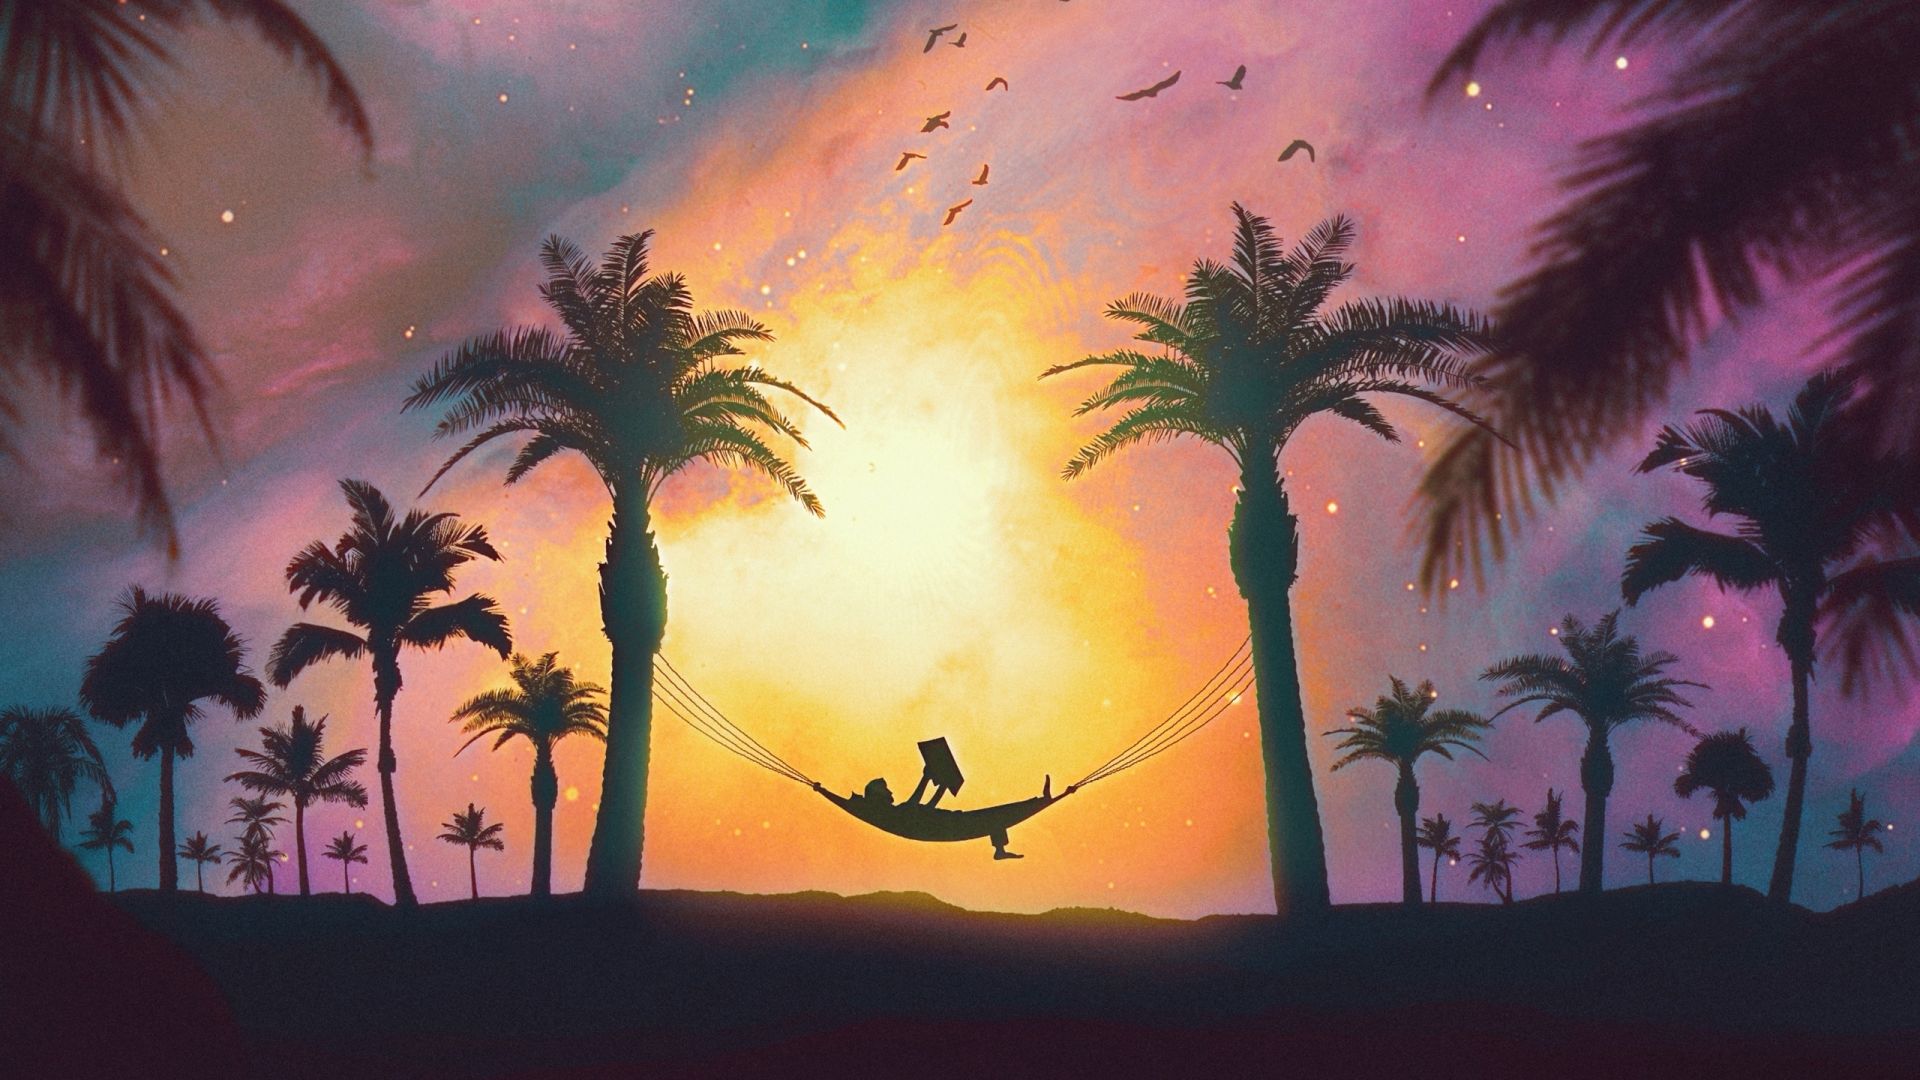 Relaxing Silhouette Sunset Art Wallpaper HD Image Picture